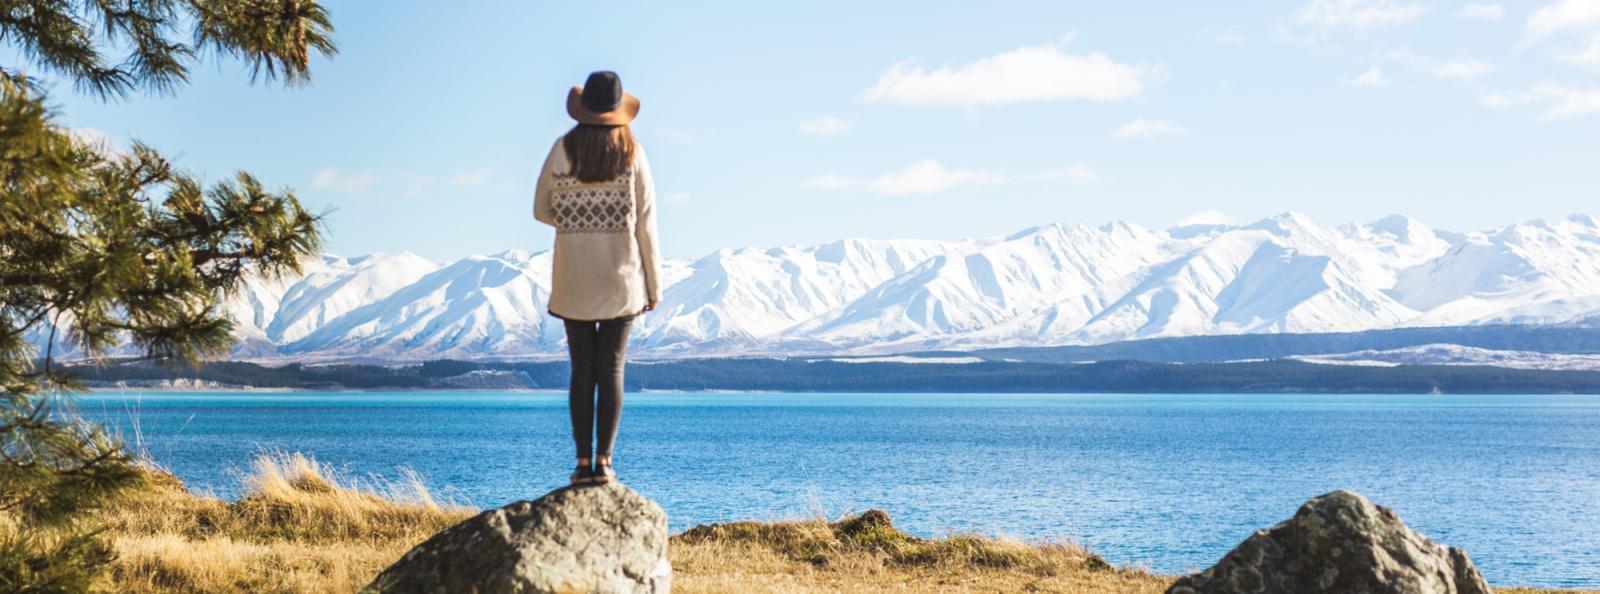 A Quick South Island Fix Itinerary